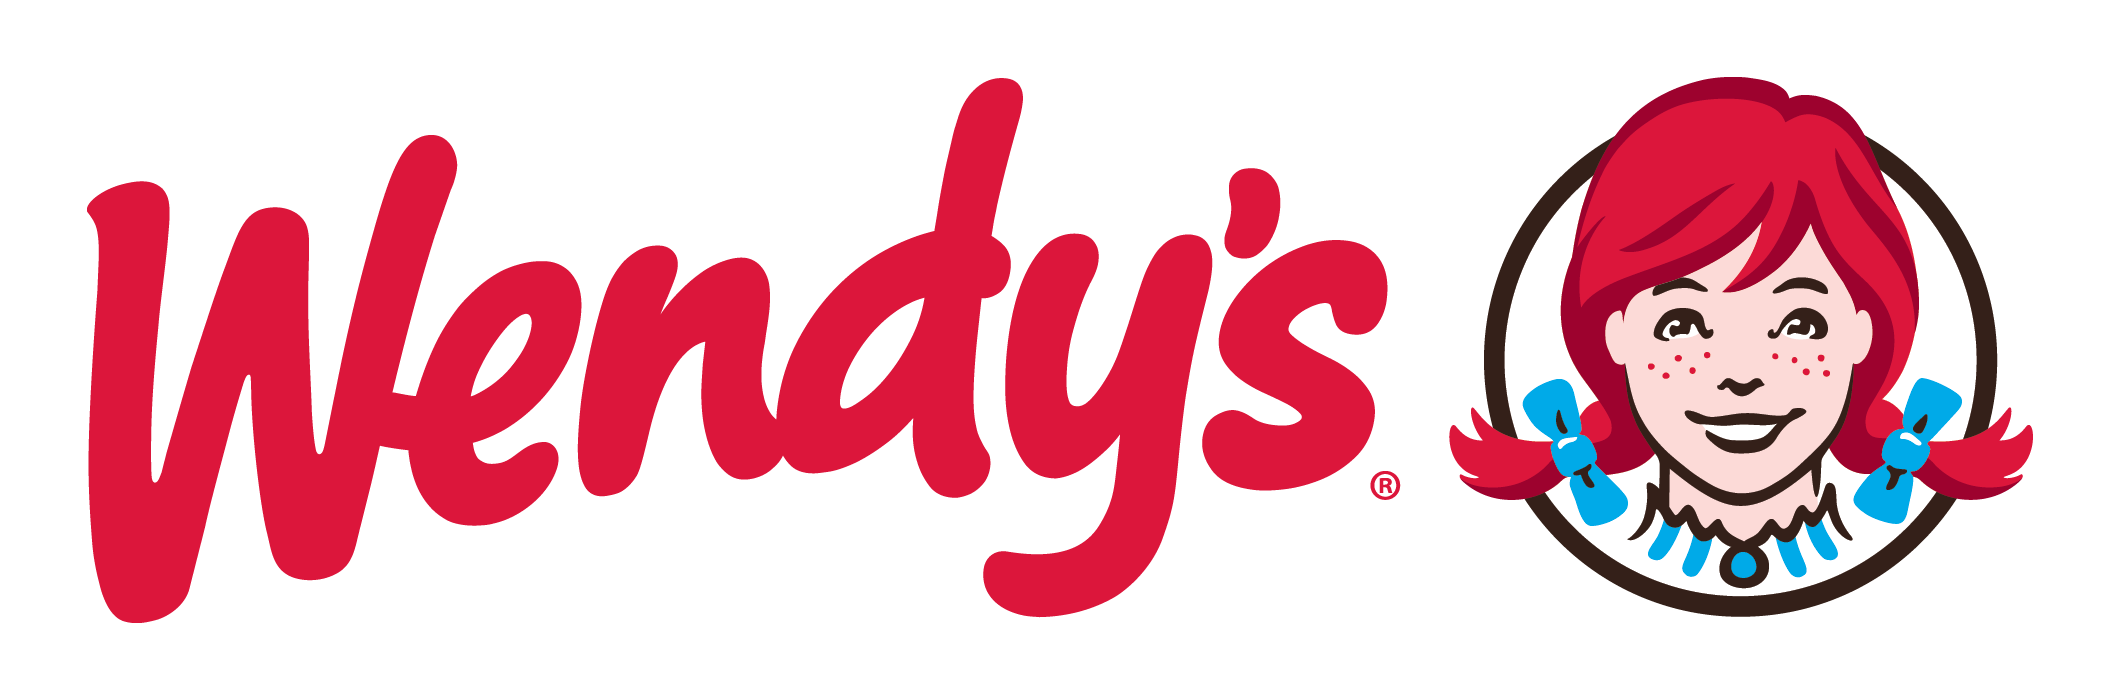 Wendys Logo, Wendys Symbol, Meaning, History and Evolution